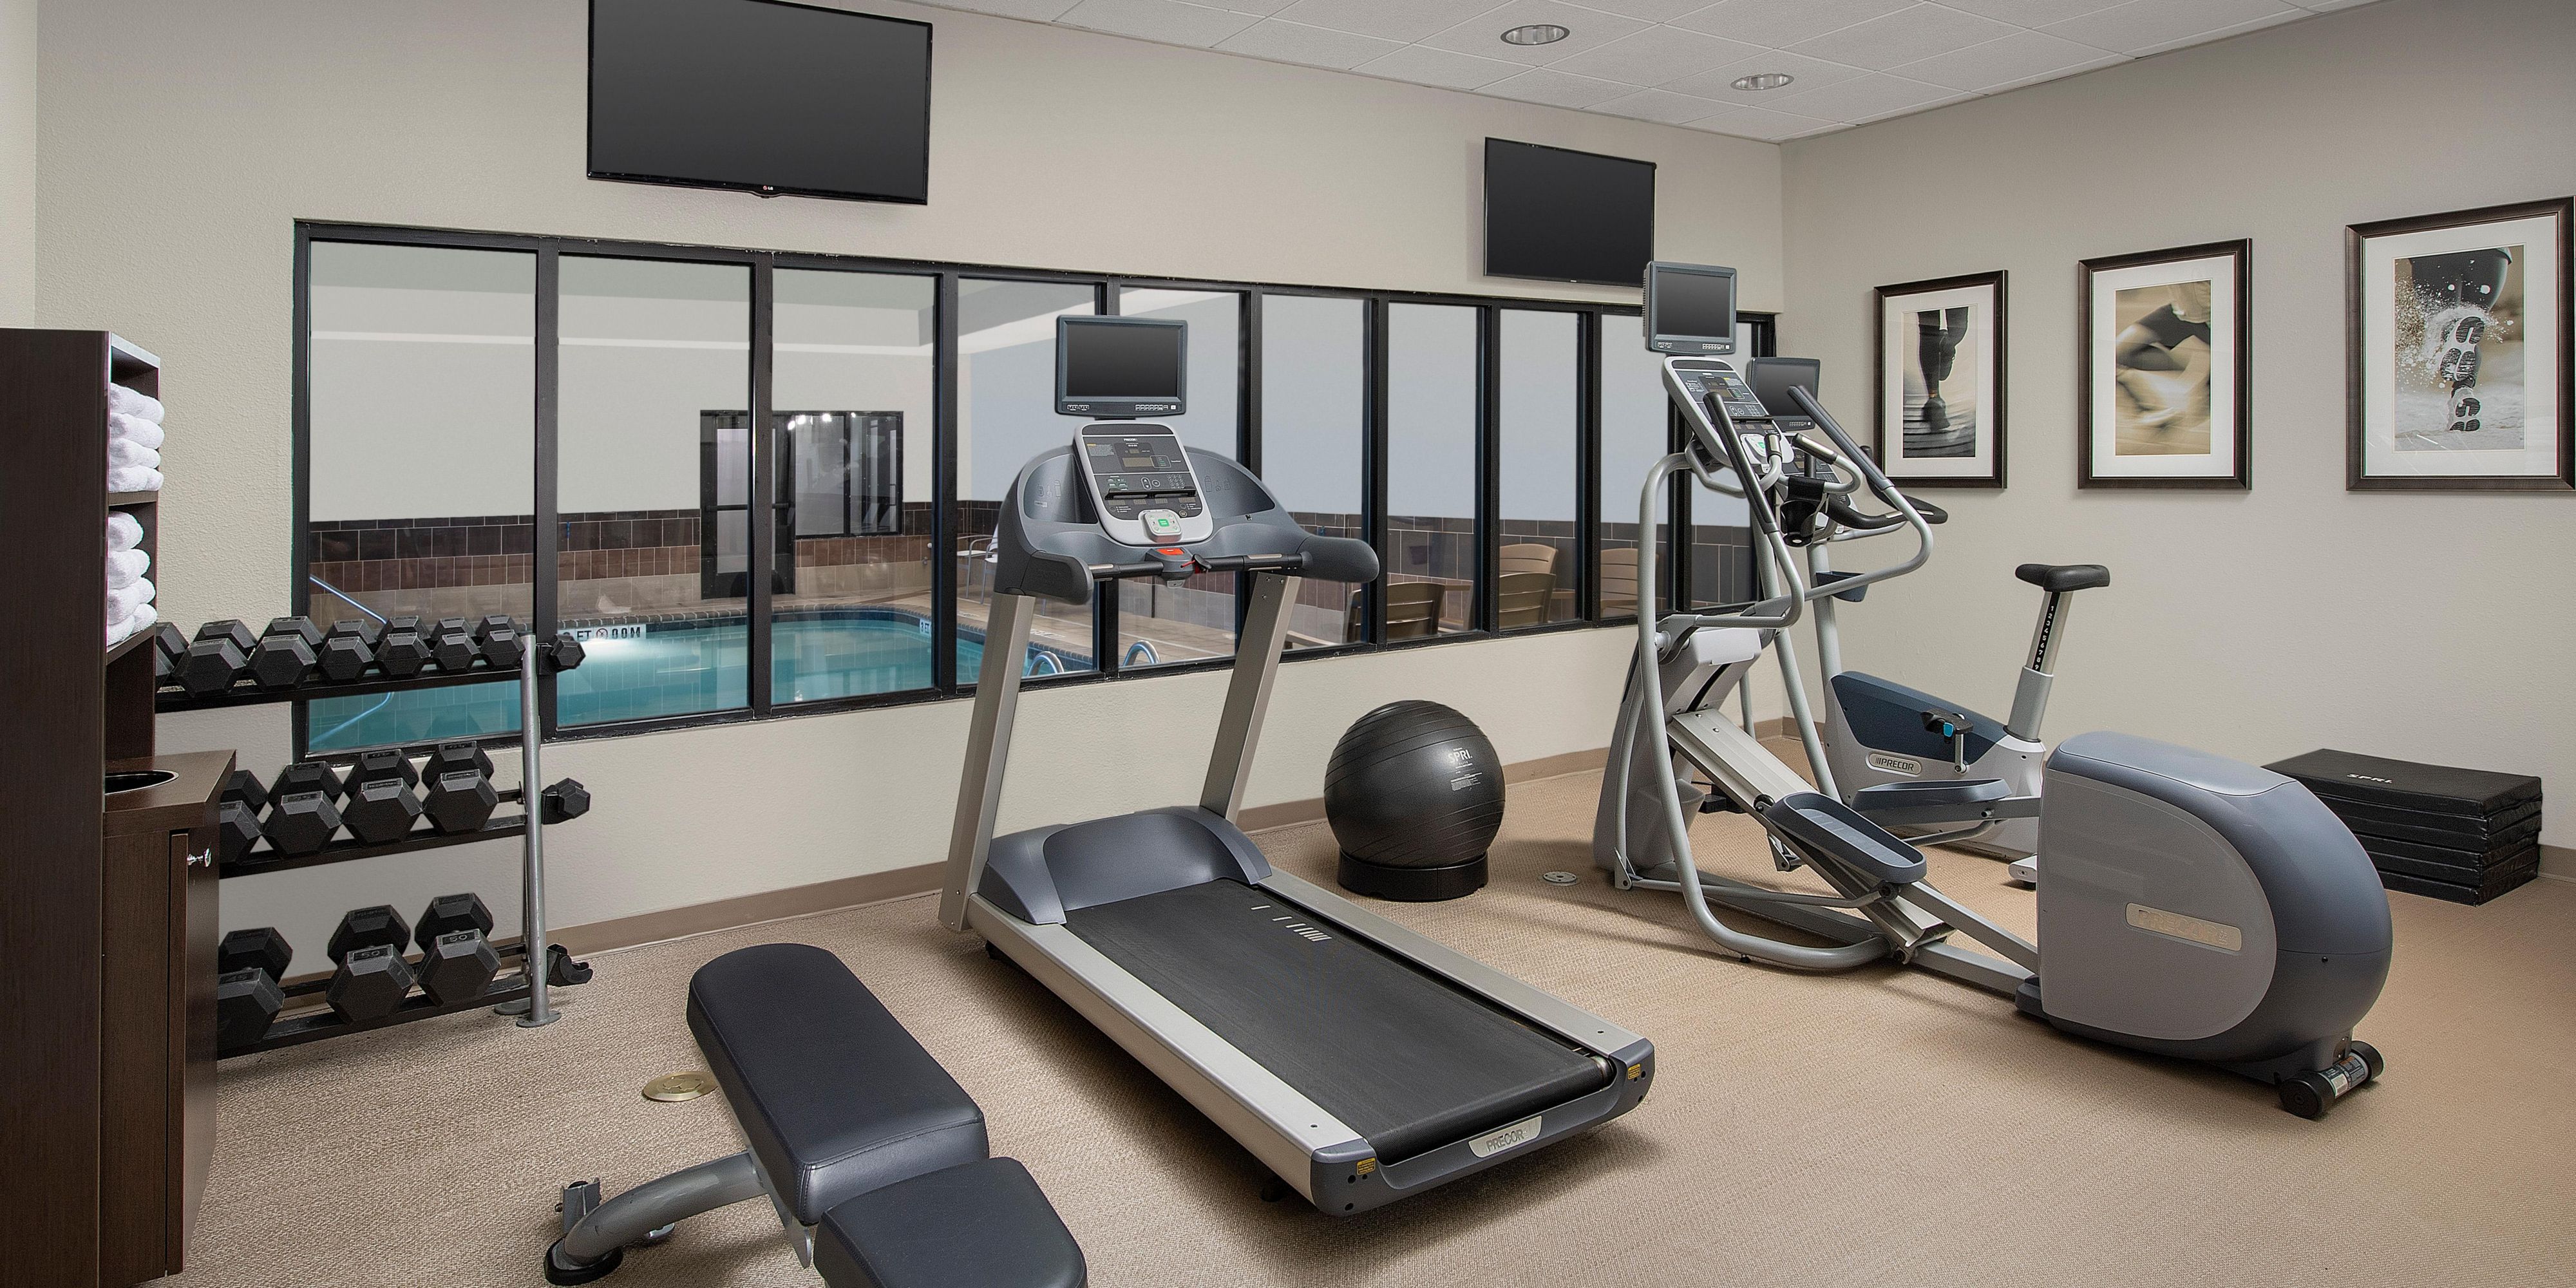 Staybridge Suites offers a state-of-the-art fitness facility 